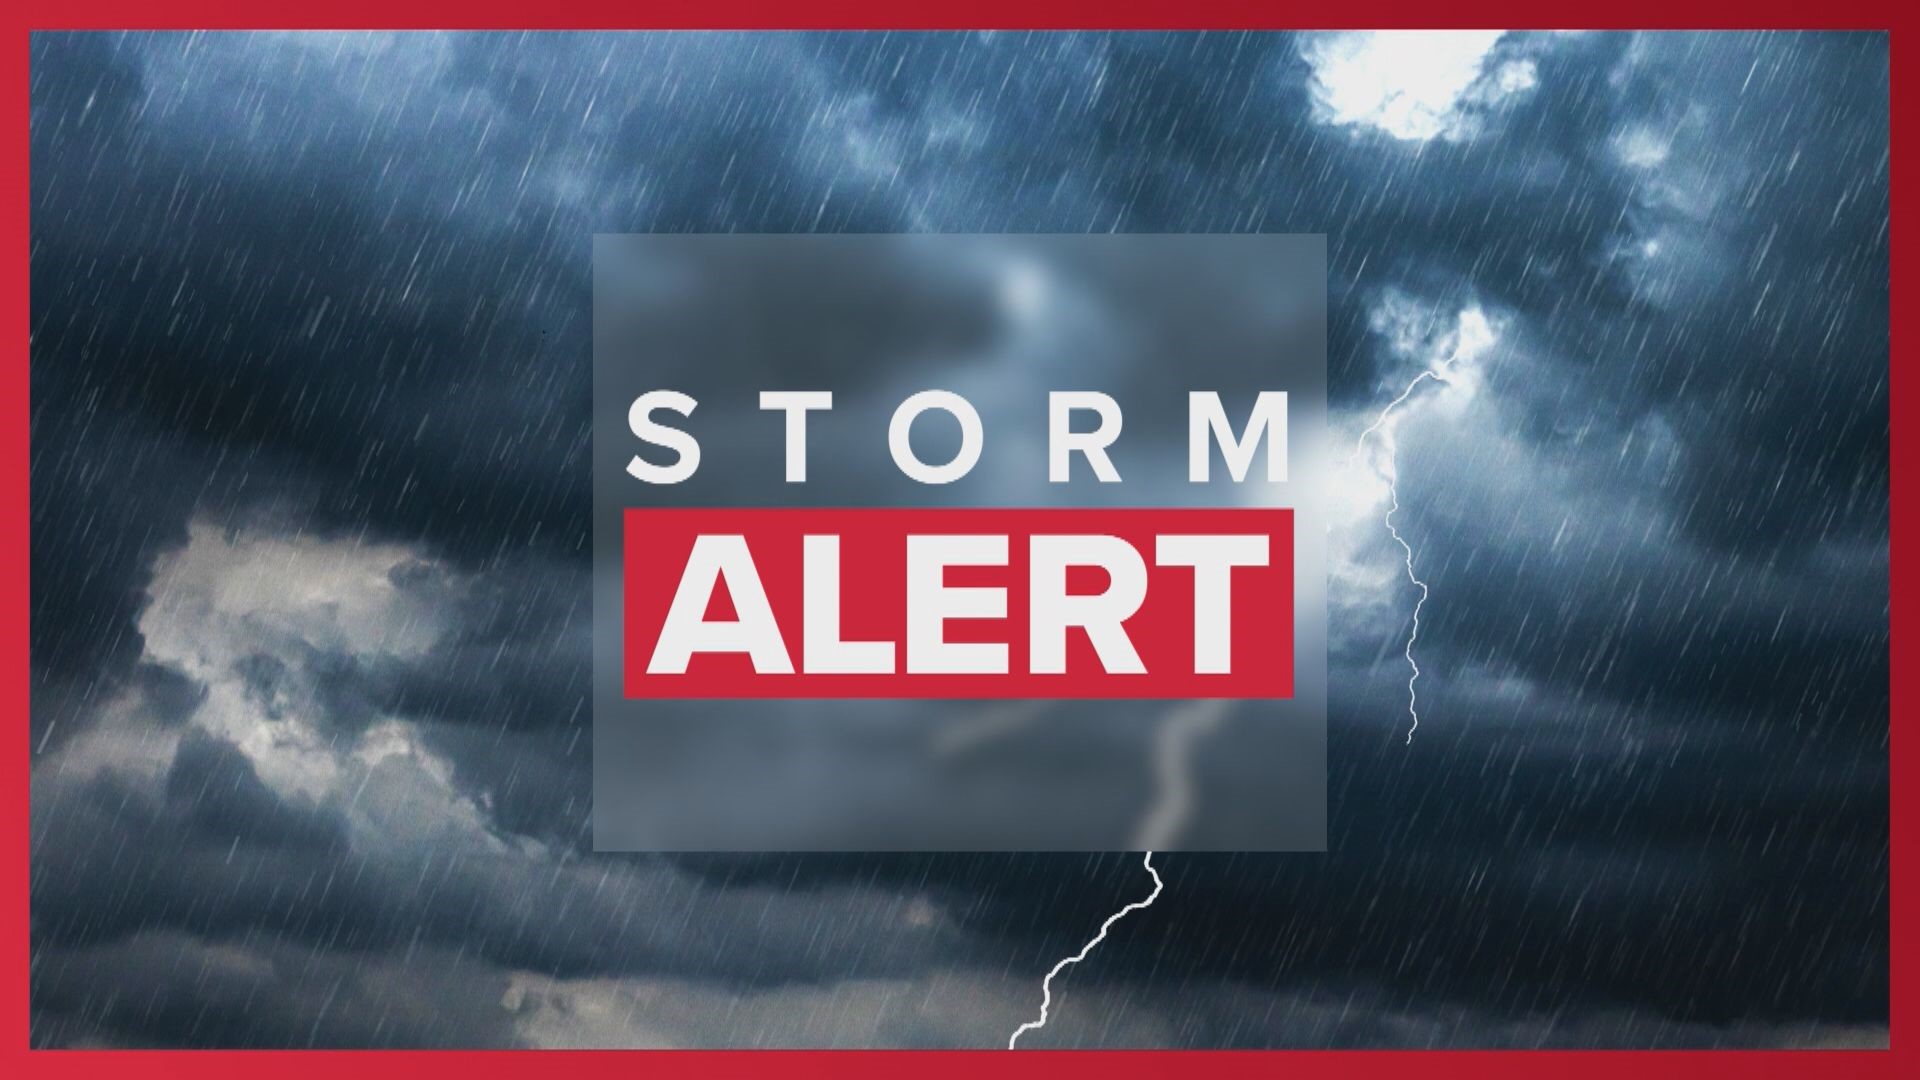 The worst of the weather is expected Tuesday afternoon in St. Louis. We're in Storm Alert because there's a chance of life-threatening storms.